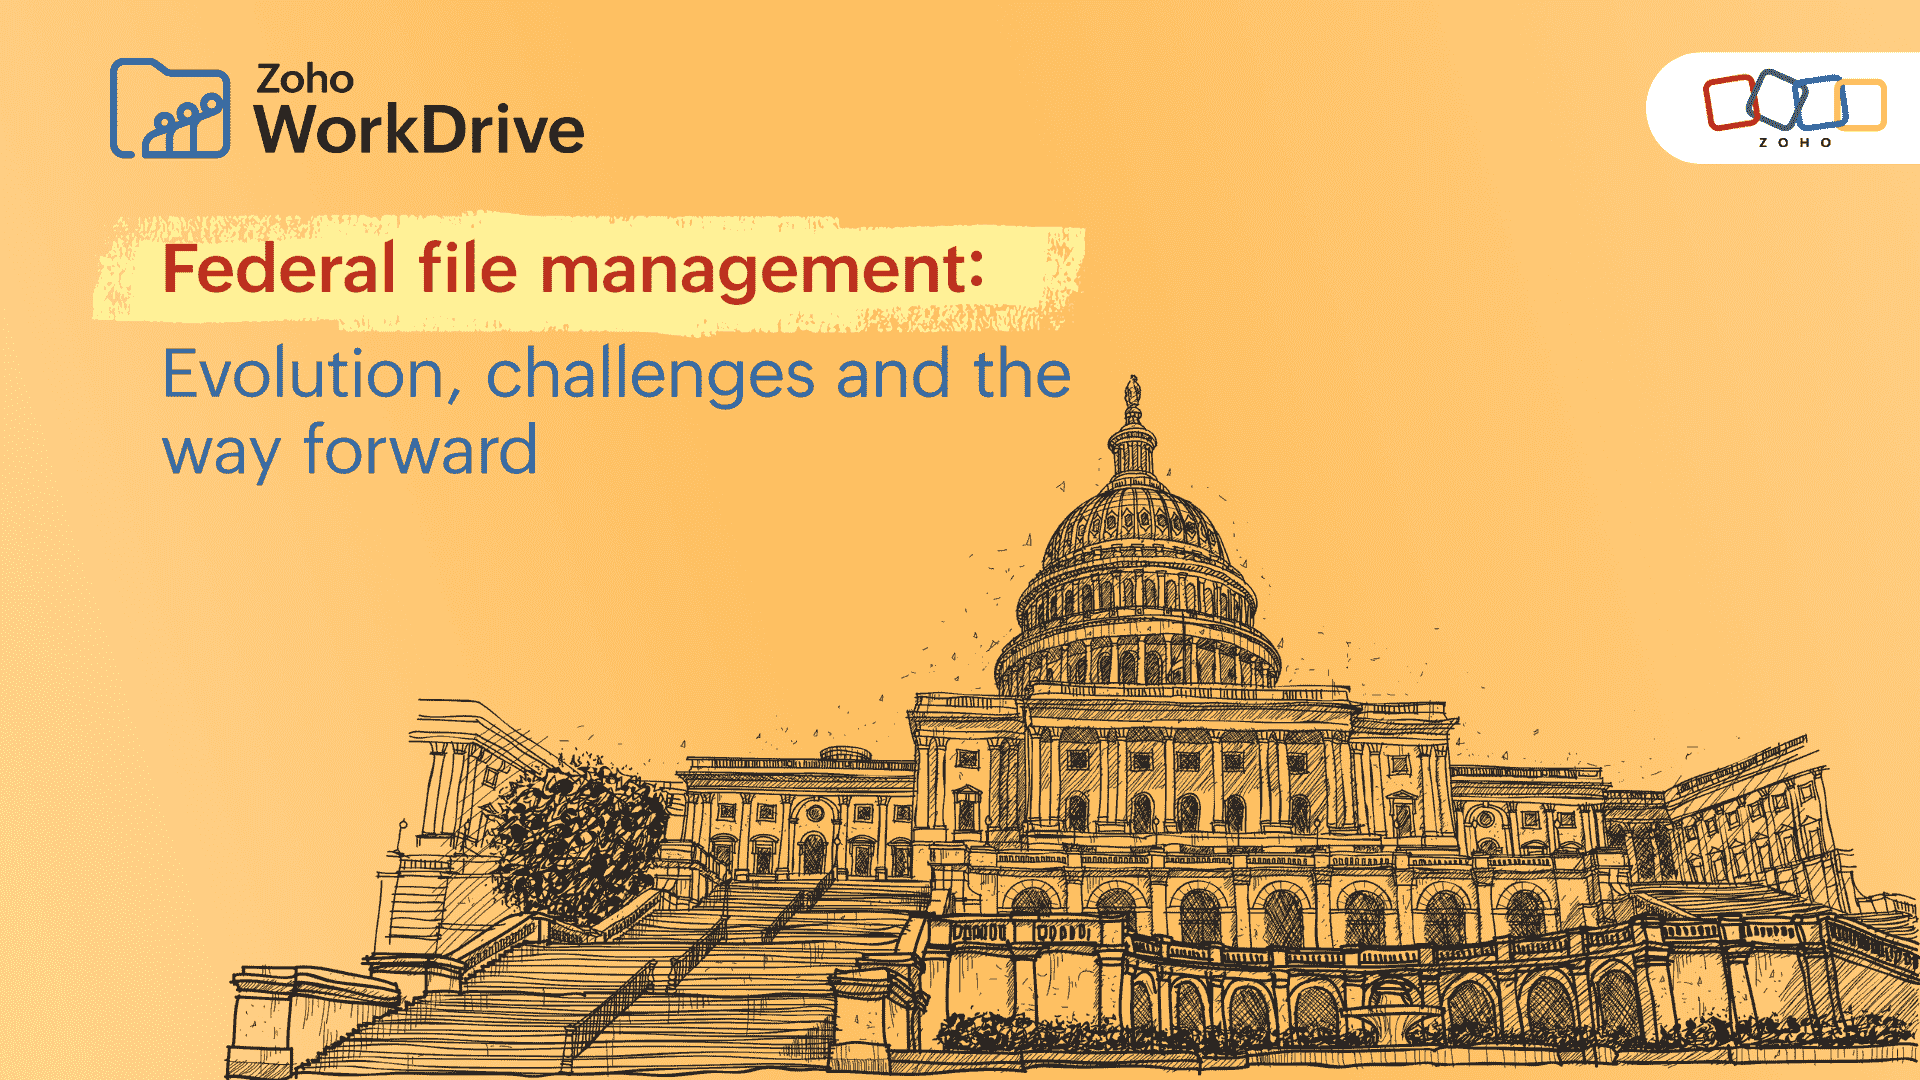 Challenges in Federal file management and the opportunities in the cloud.